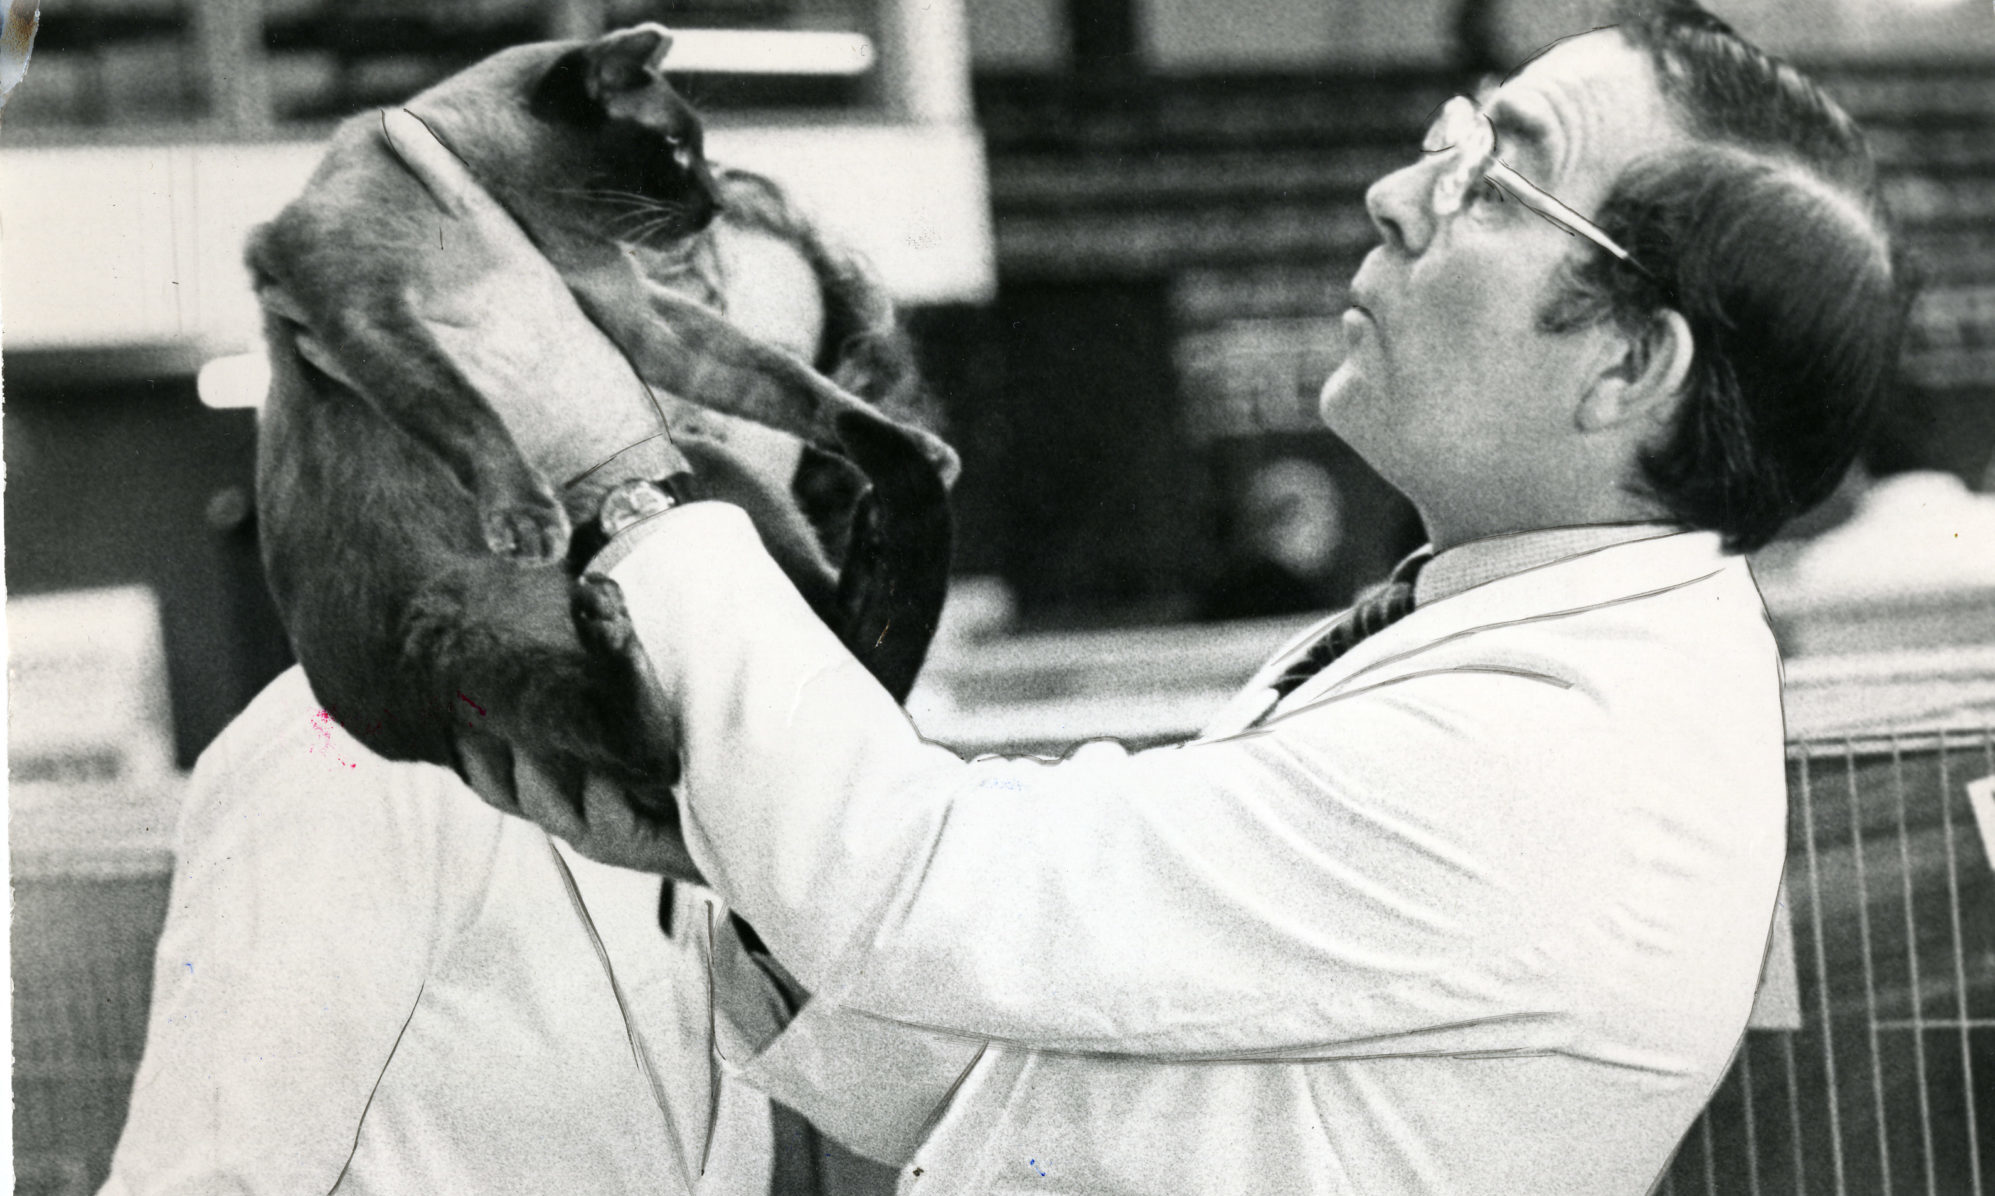 A Burmese cat comes under scrutiny at the Nor' East of Scotland Cat Show at Dundee Ice Arena on May 11 1981.